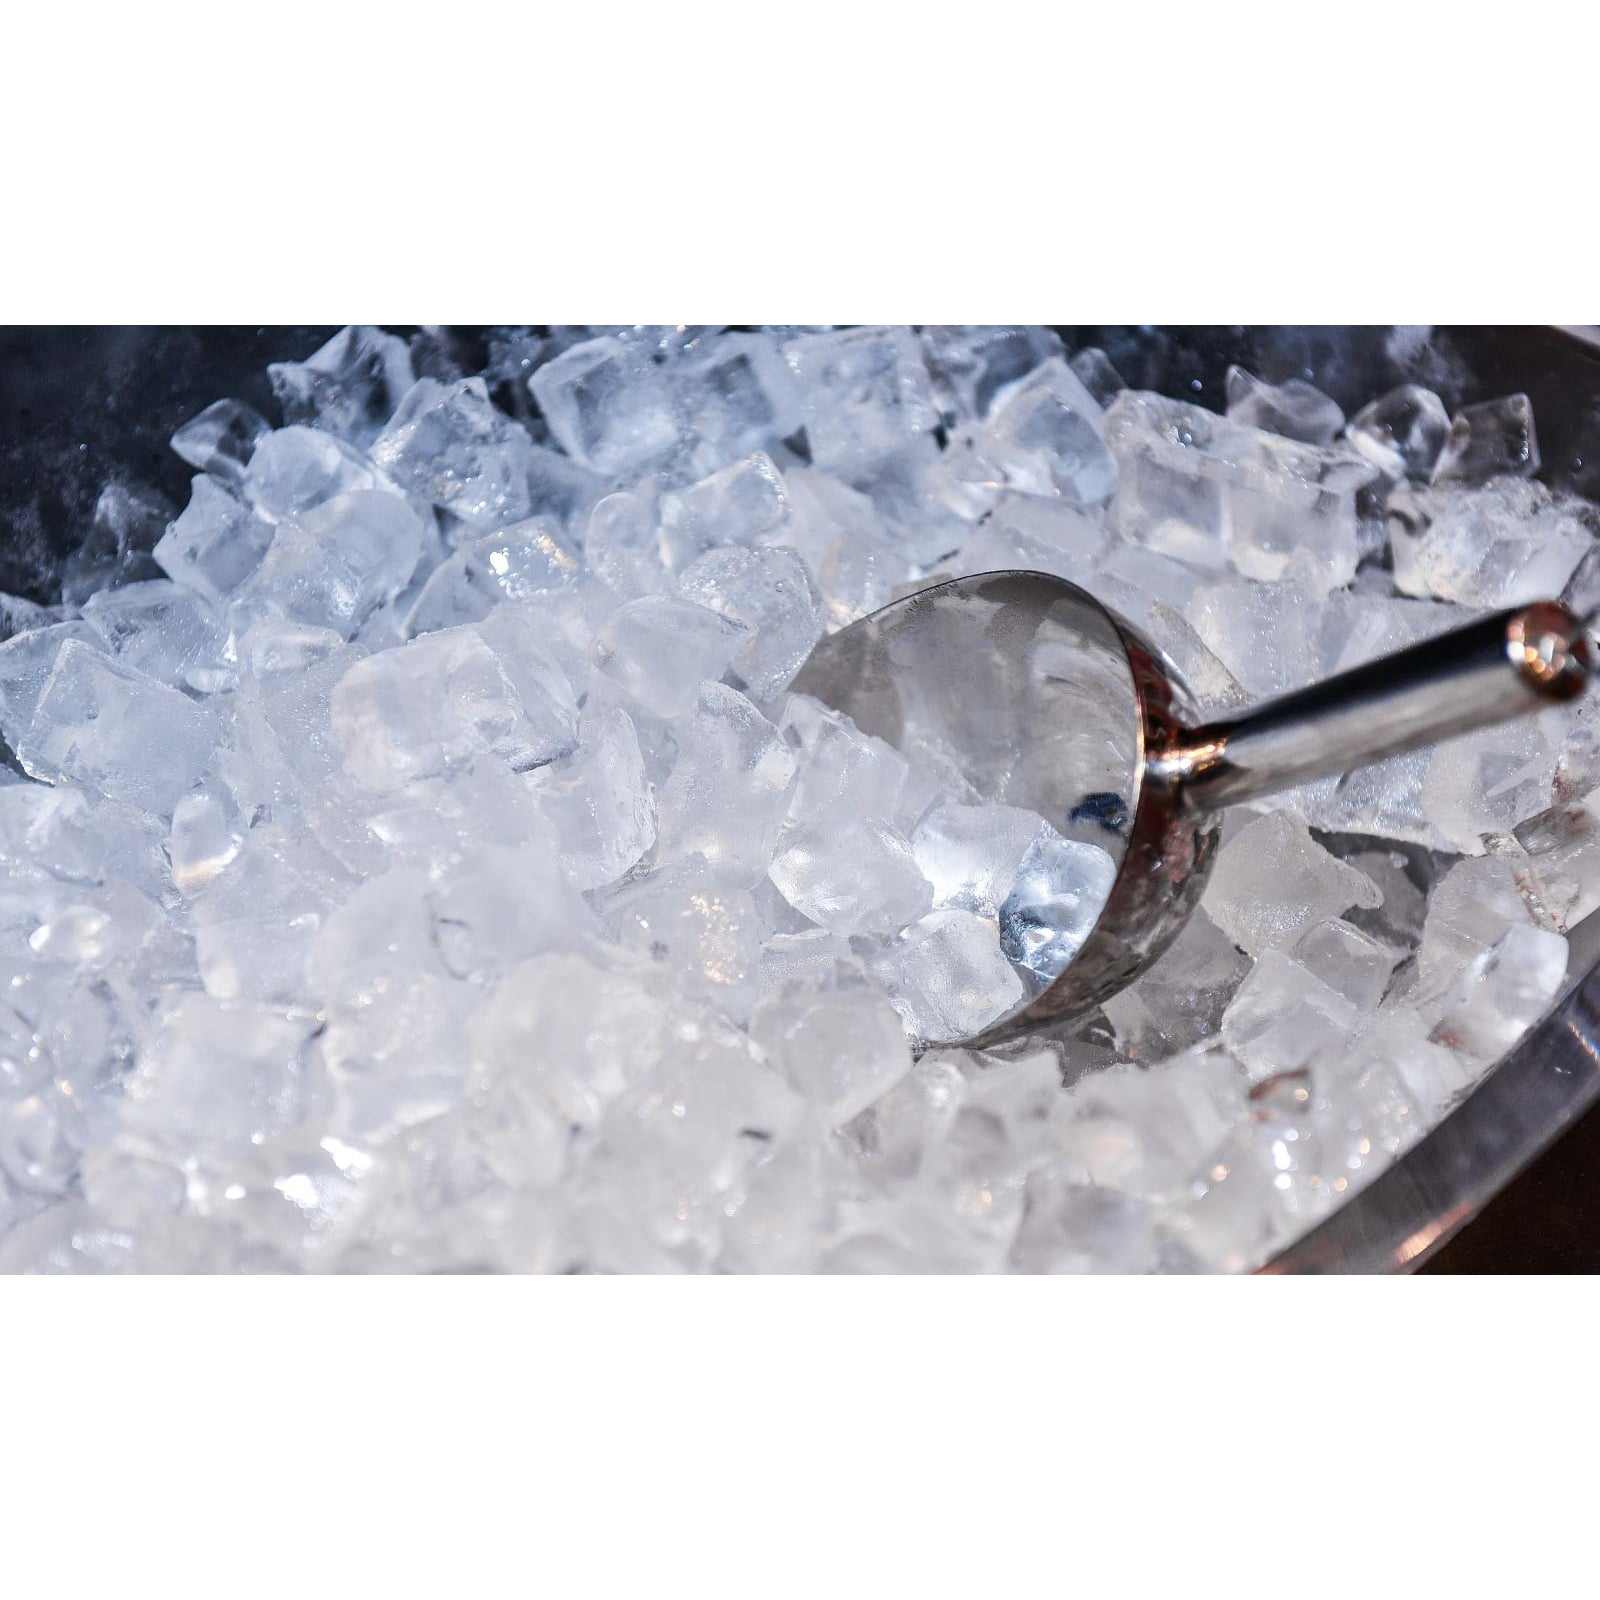 5 Reasons Why You Need A Water Filter For Your Commercial Ice Machine?